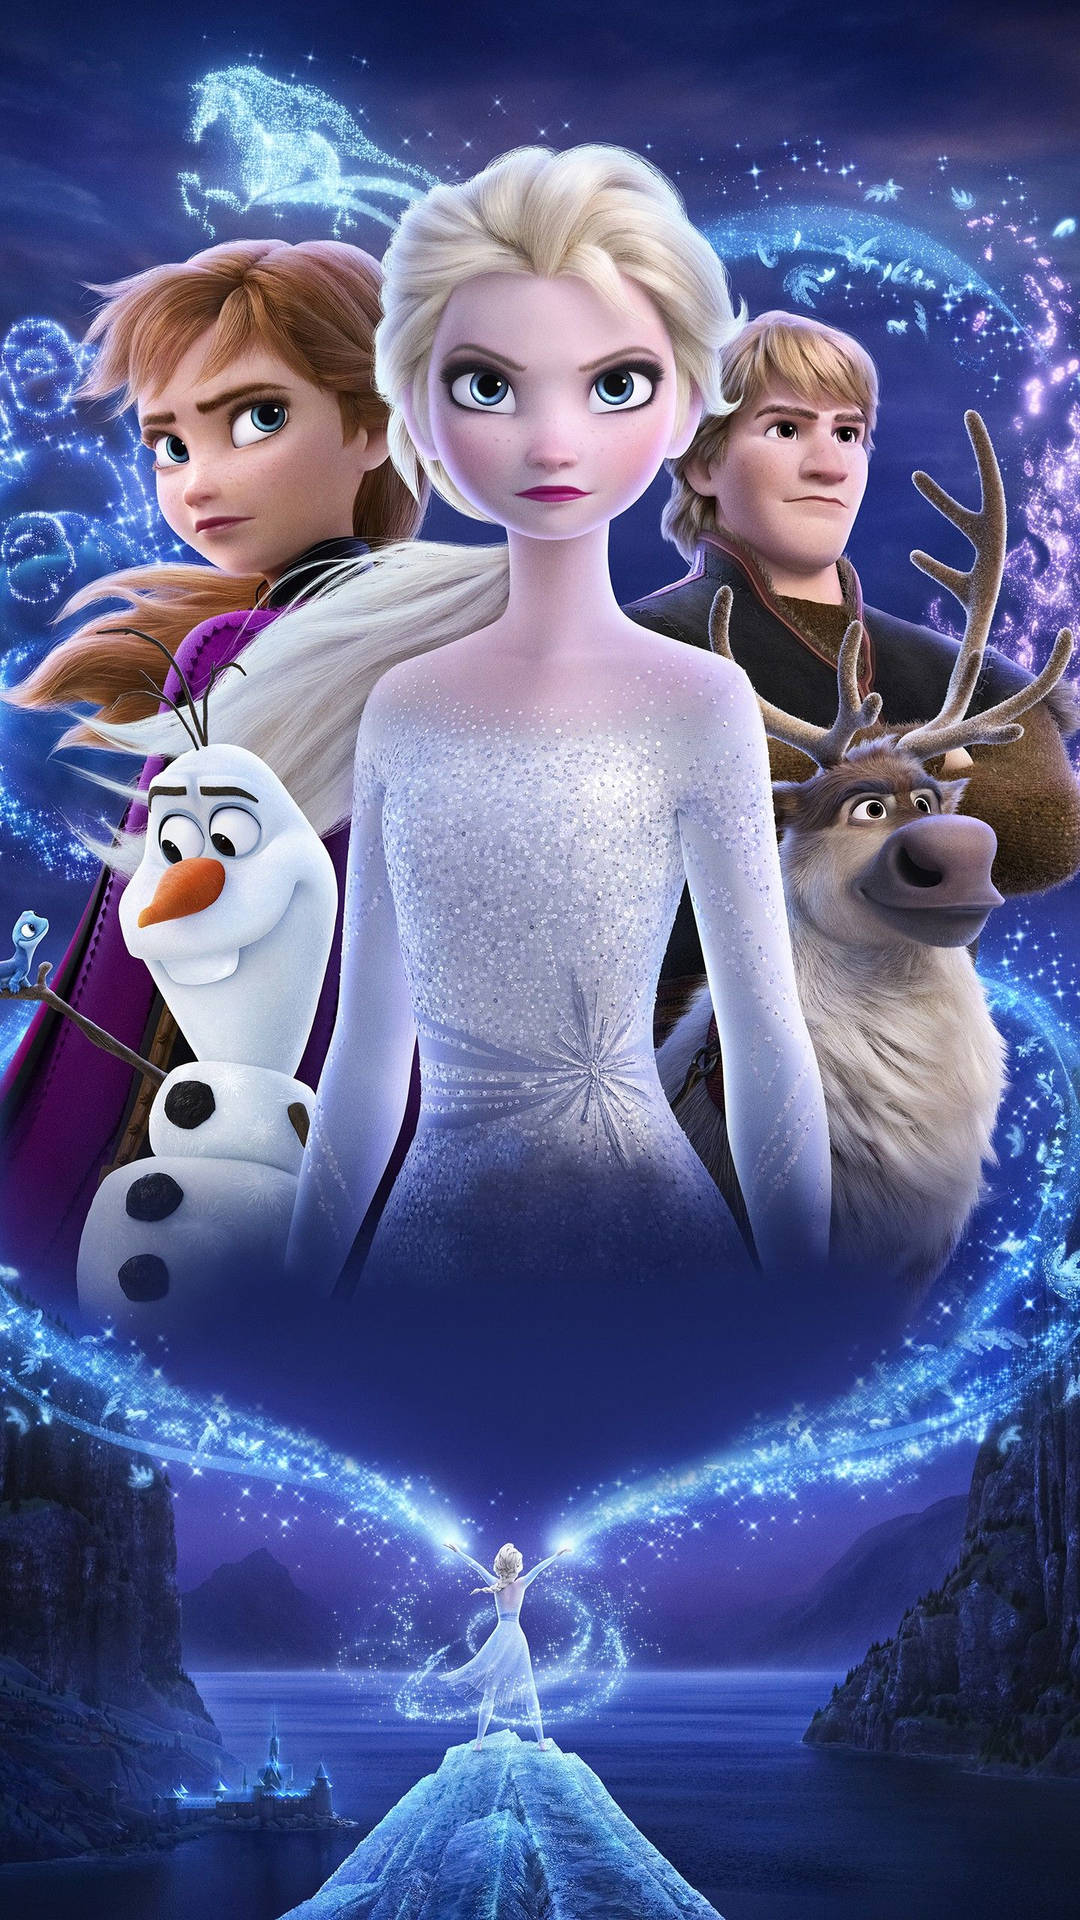 Elsa With Friends From Frozen 2 Background